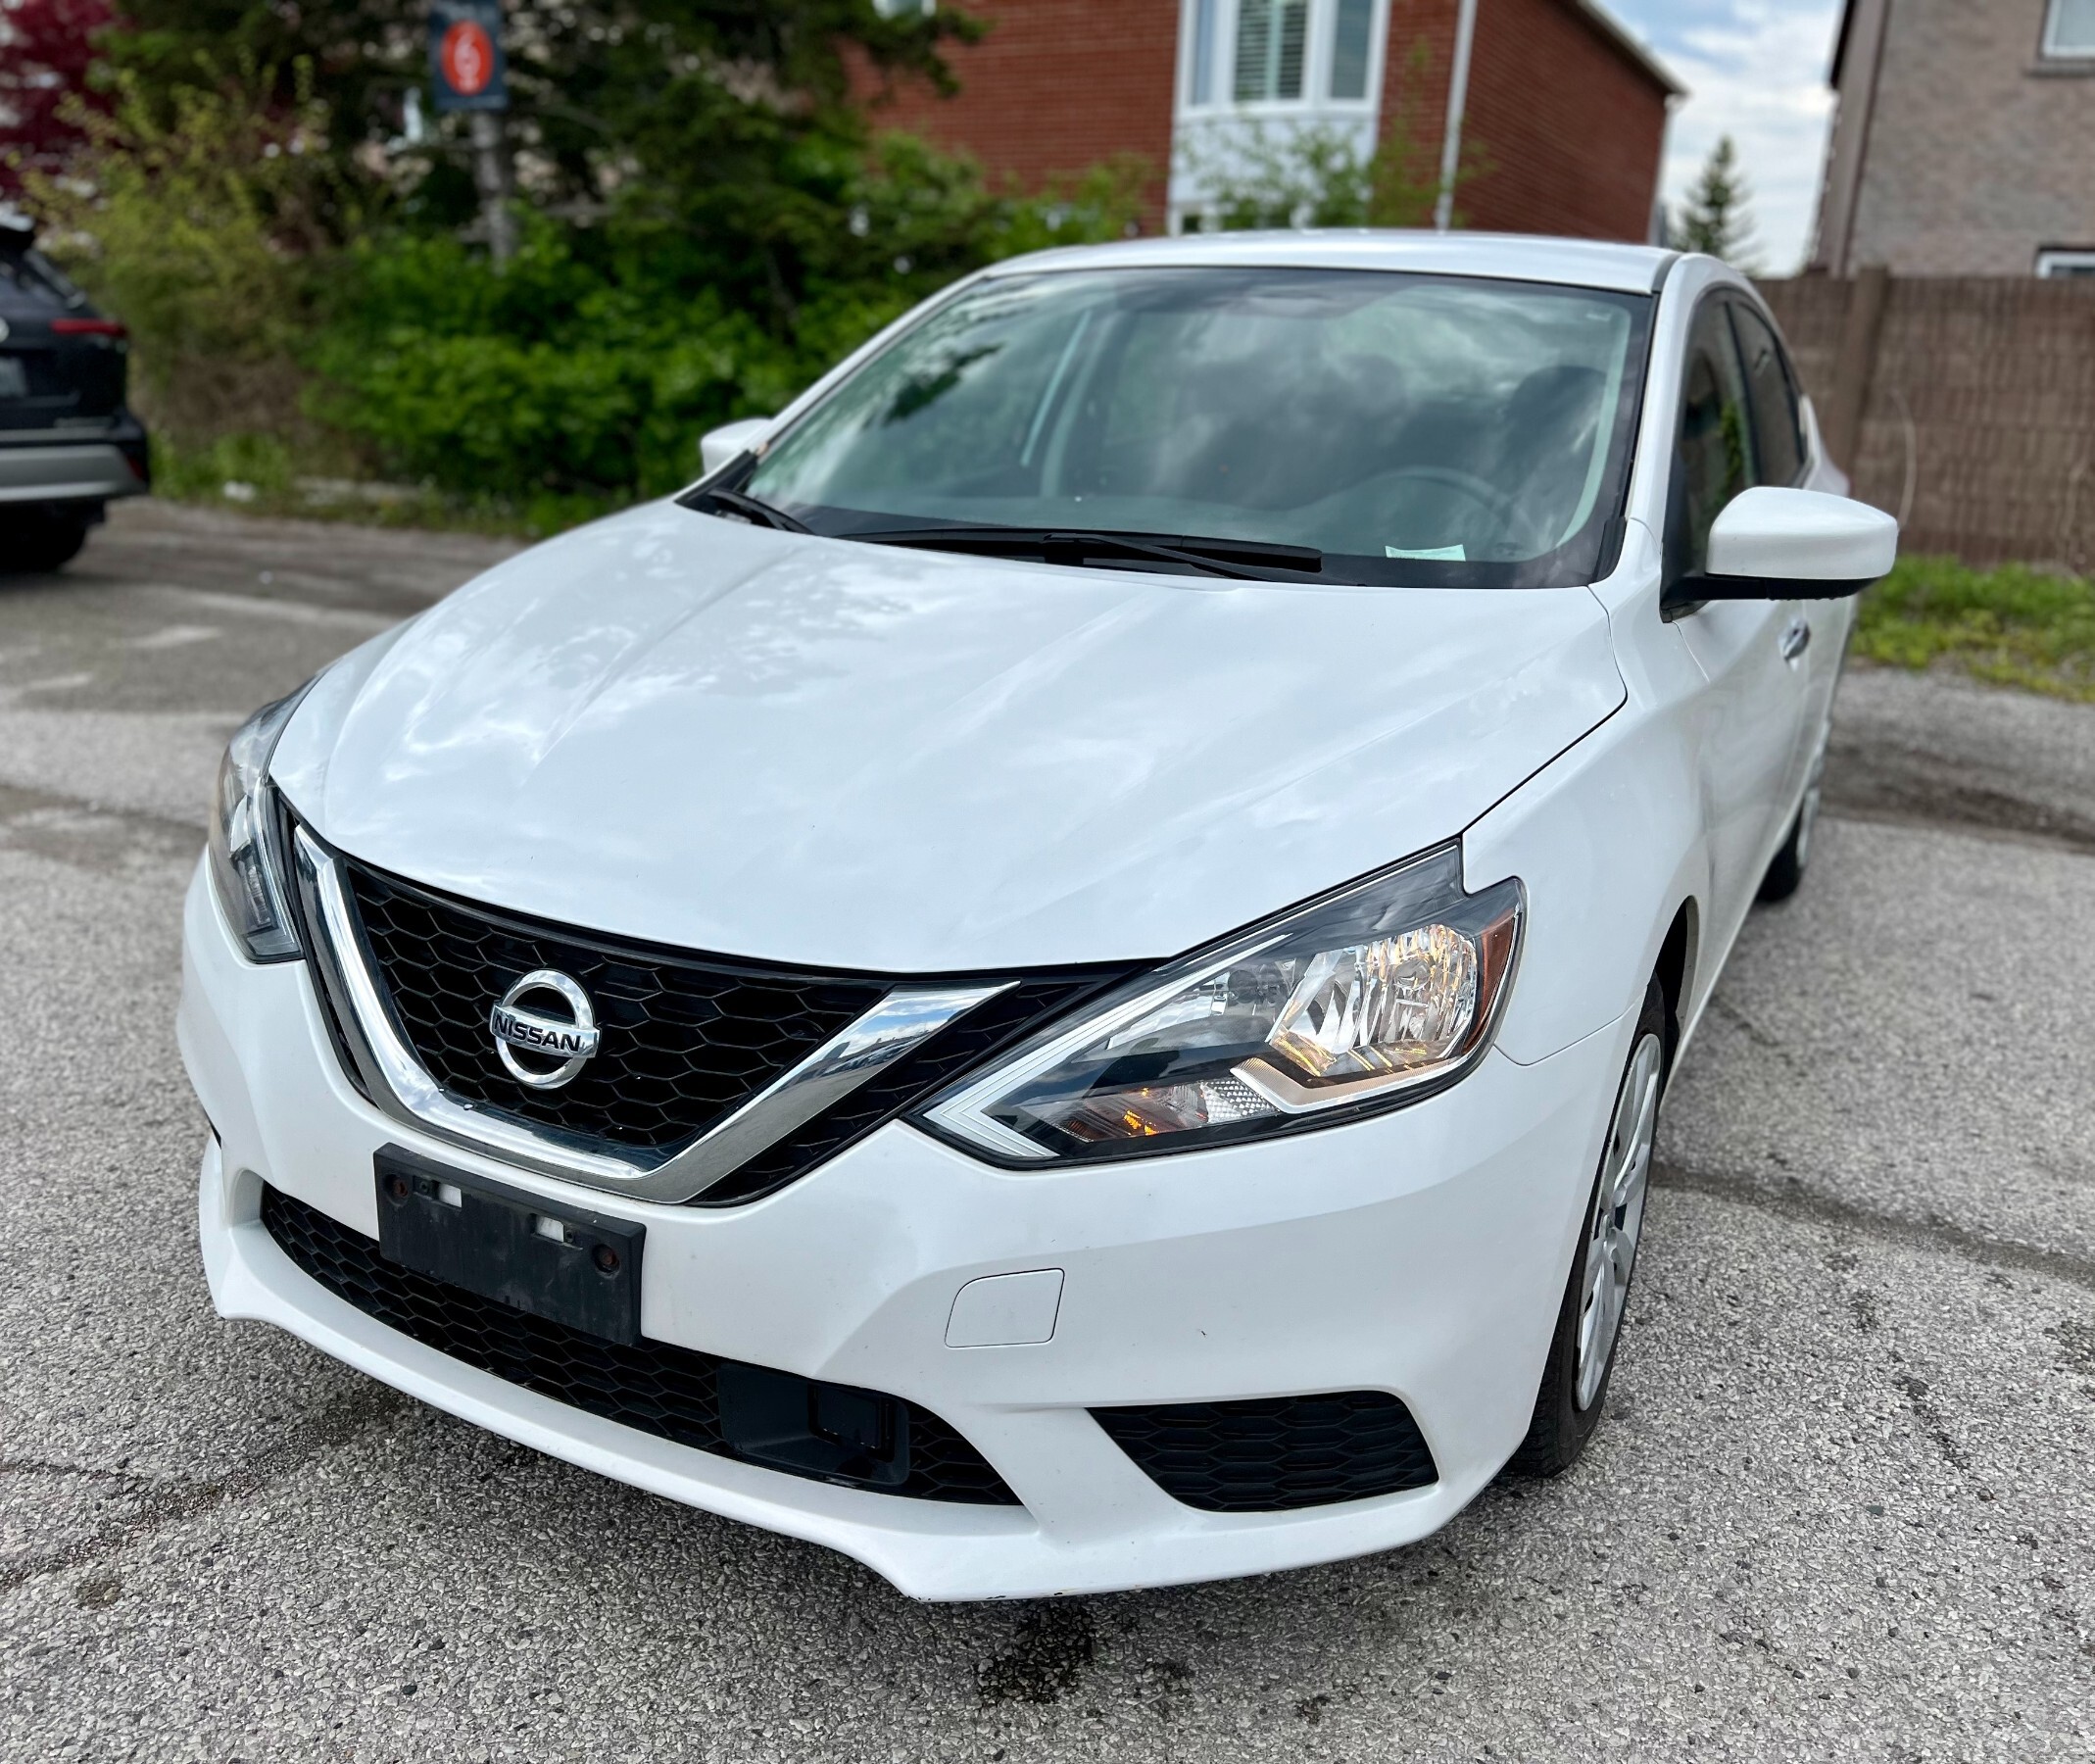 2019 Nissan Sentra 1.8 SV - SALE EVENT MAY 24- MAY 25